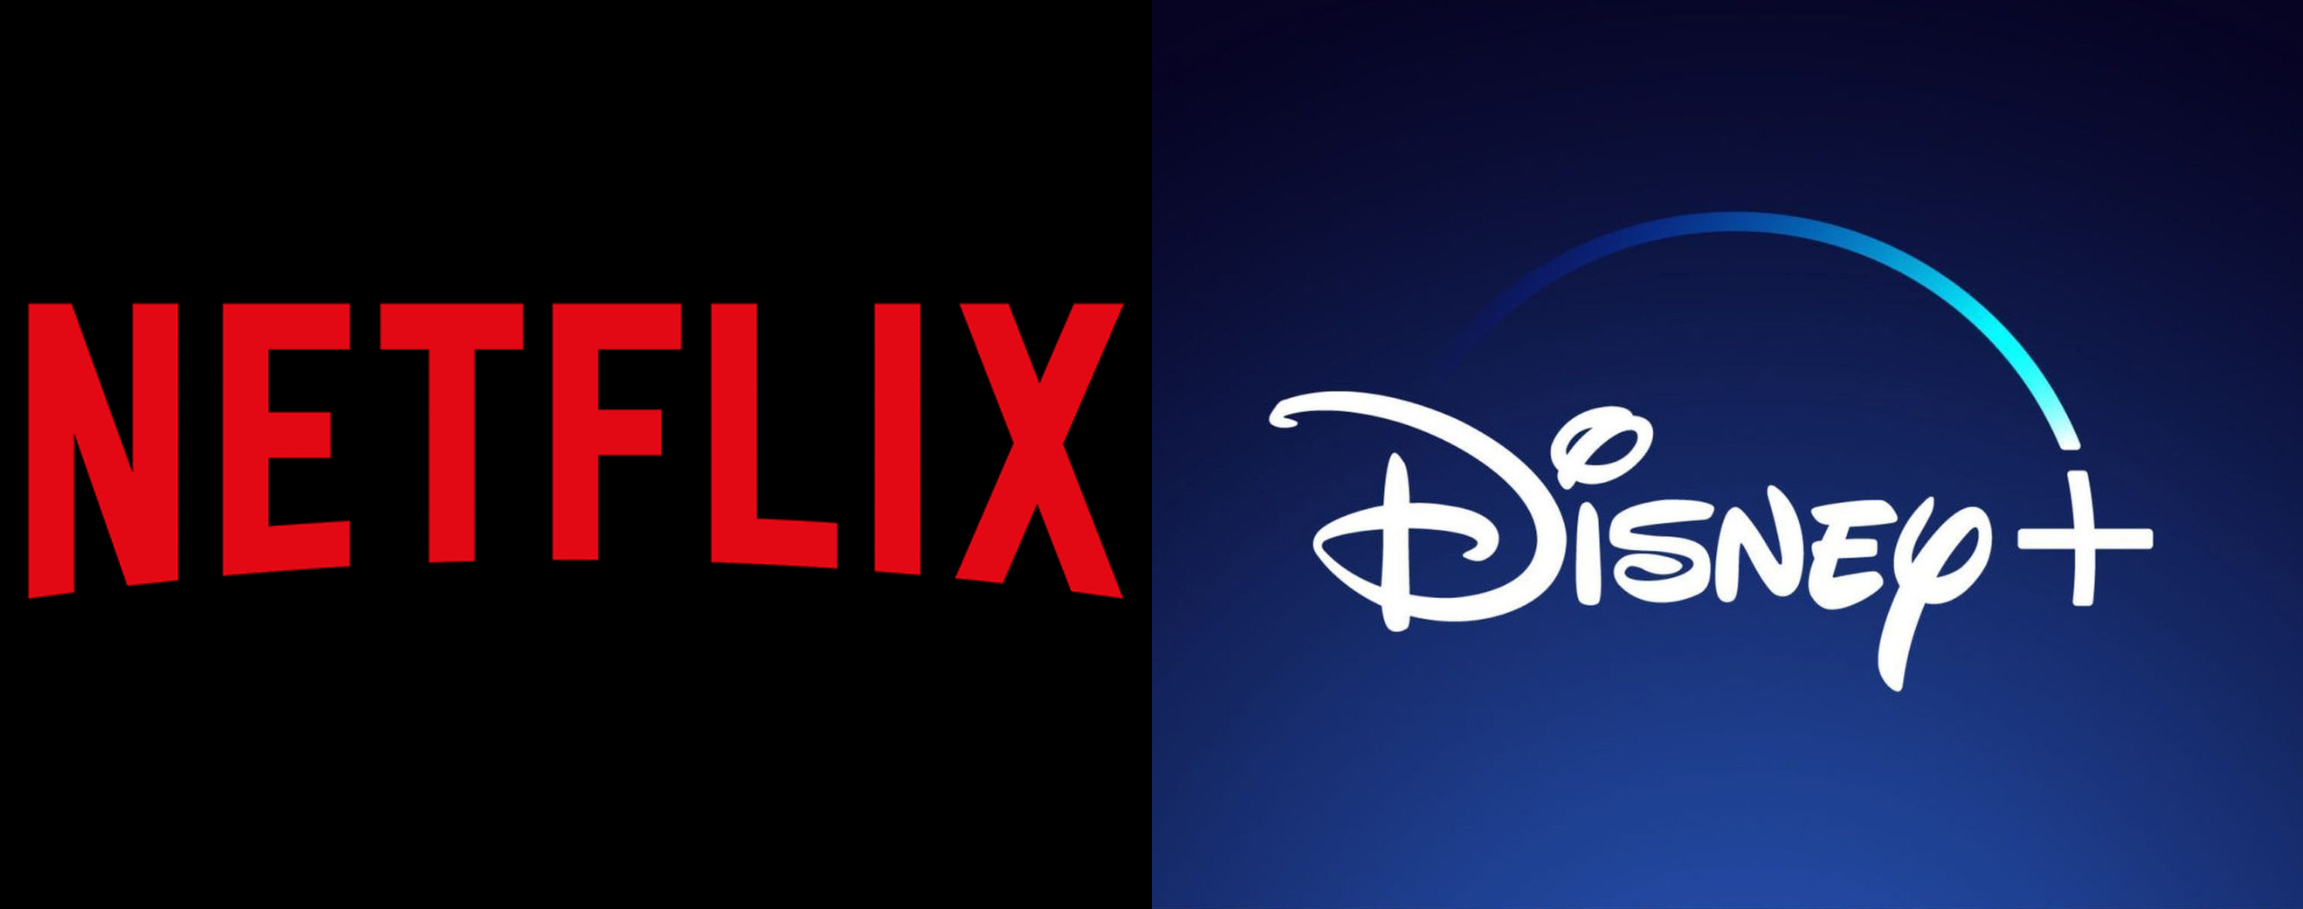 The rise of Disney Plus is putting Netflix out of business, slowly but surely. Why? How? Let’s take a dive and we’ll discover.